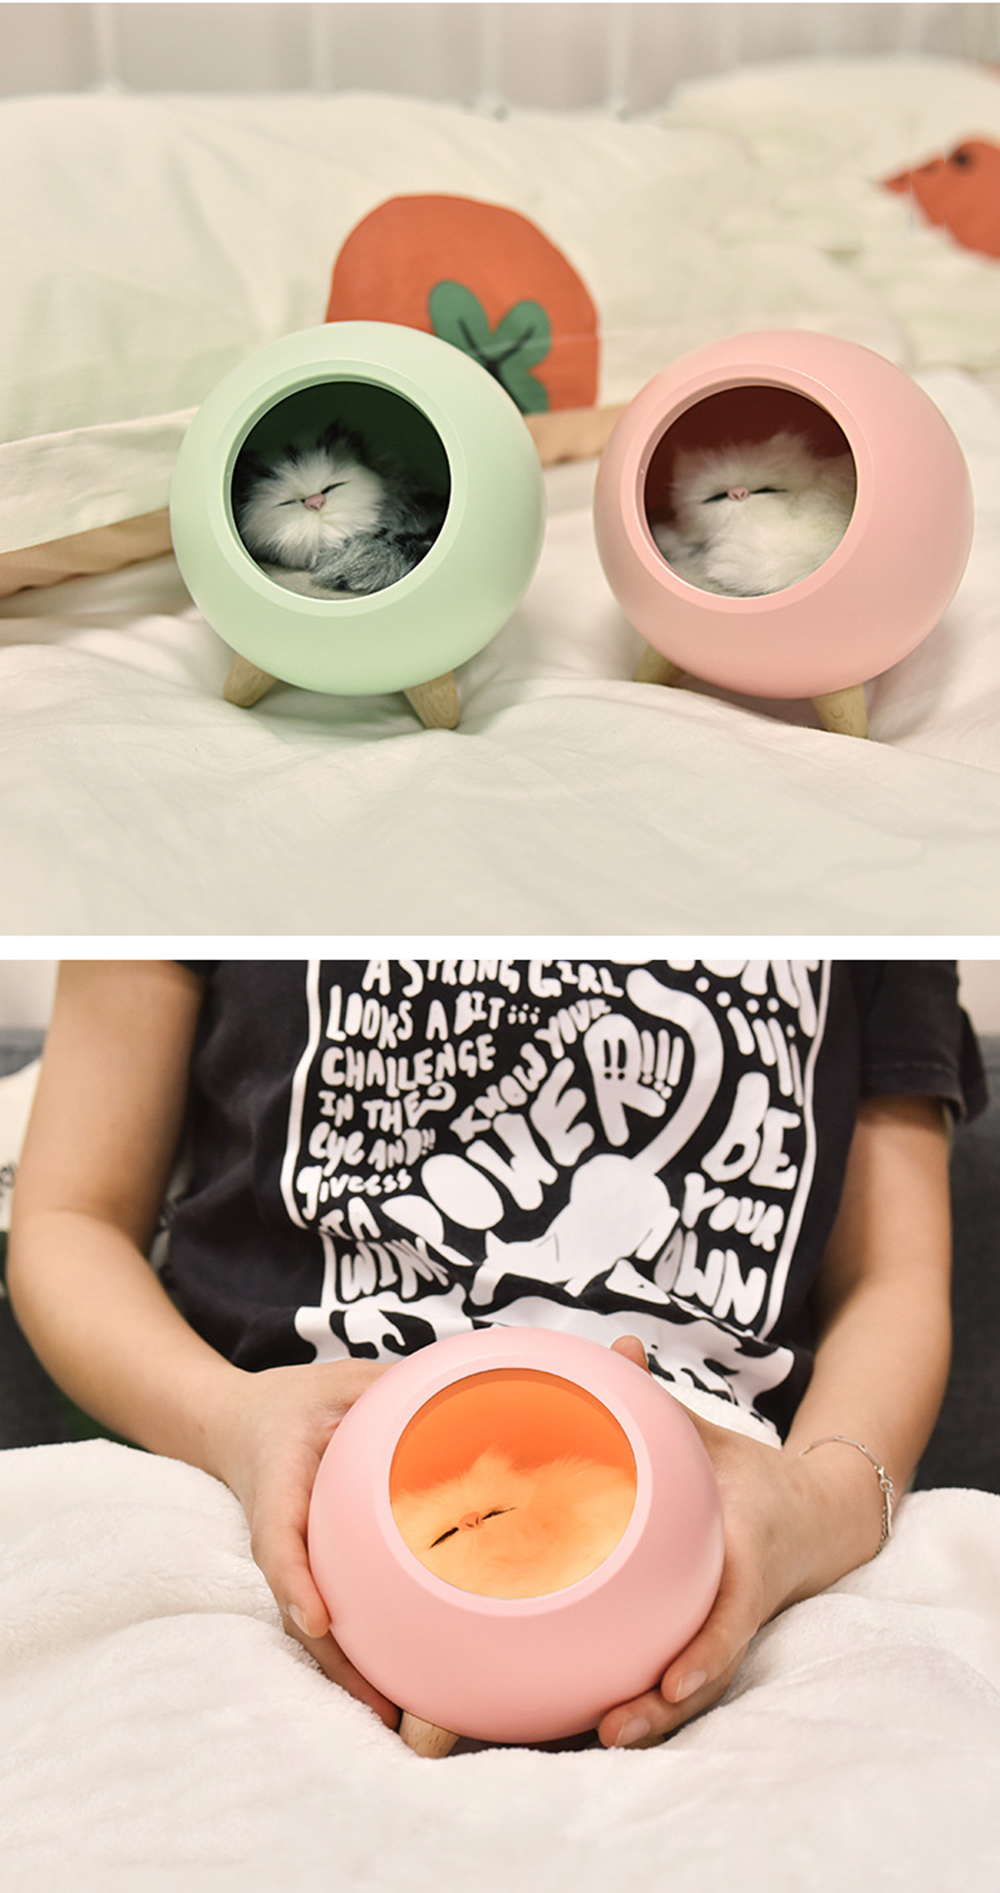 Novely-LED-Pet-House-Atmosphere-Night-Light-Touch-Dimming-Cat-Lamp-USB-Rechargeable-Table-Lamps-Bedr-1838823-11